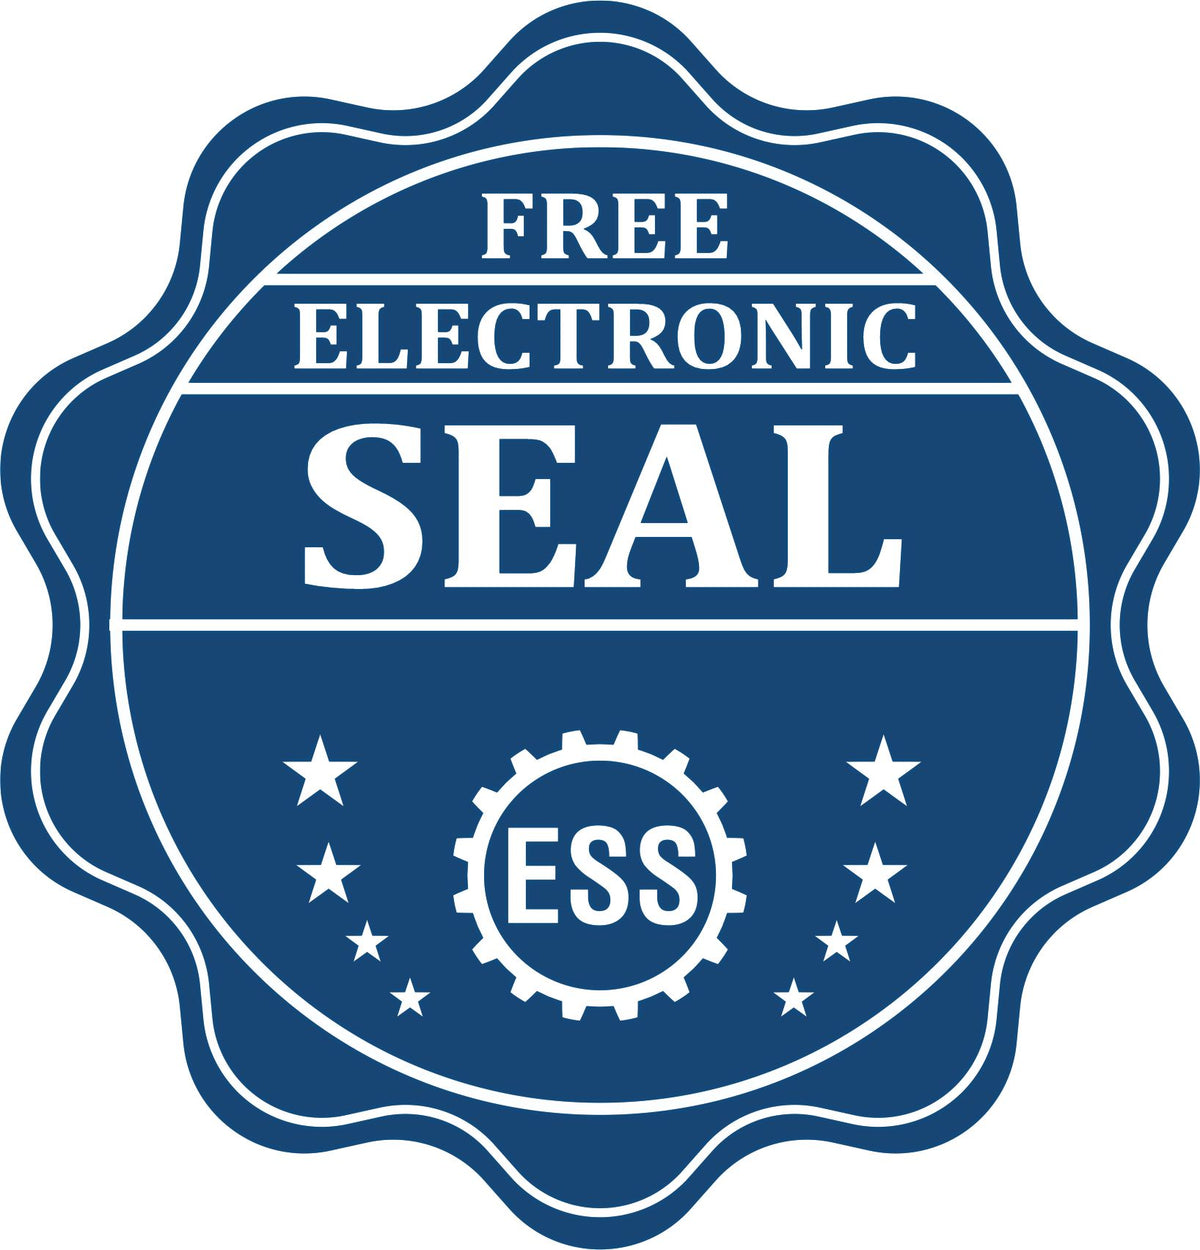 A badge showing a free electronic seal for the Gift Alabama Land Surveyor Seal with stars and the ESS gear on the emblem.